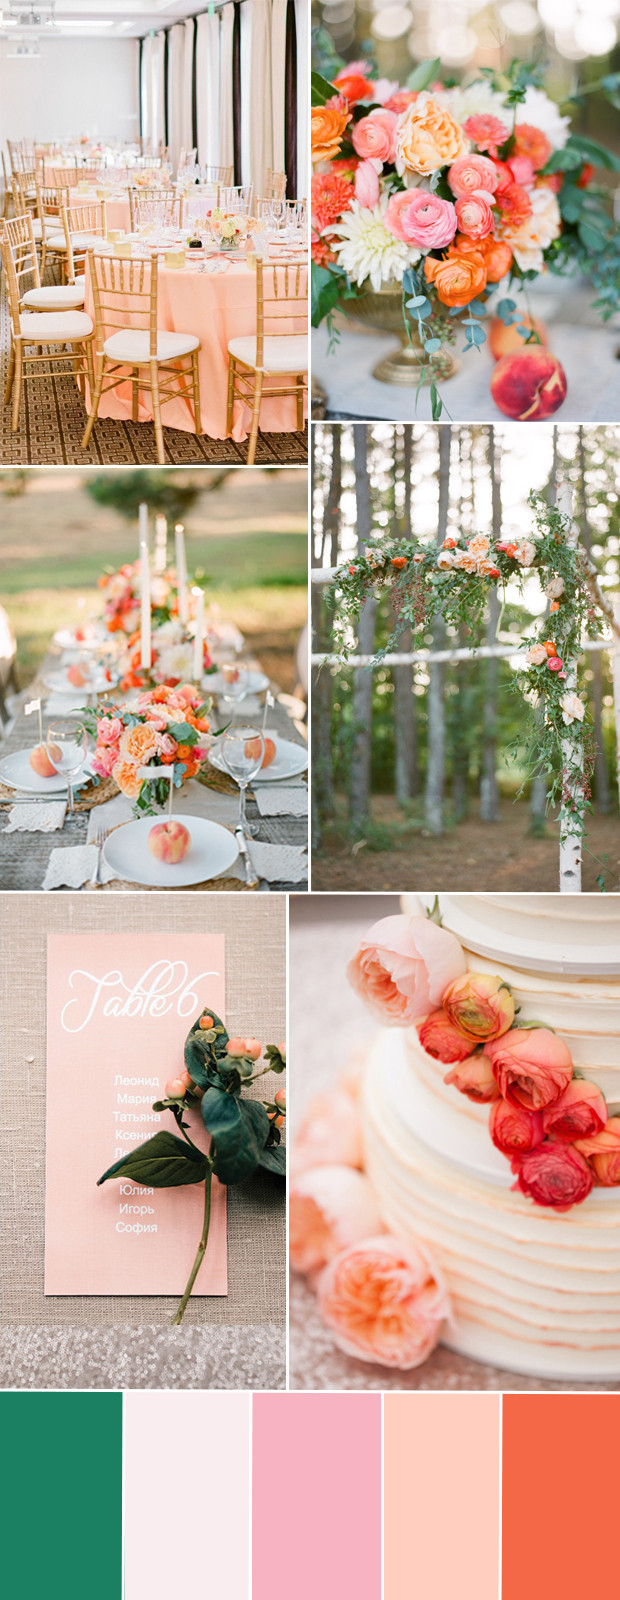 Peach Color Wedding
 Five Popular Shades of Pink Color Ideas for your Dream